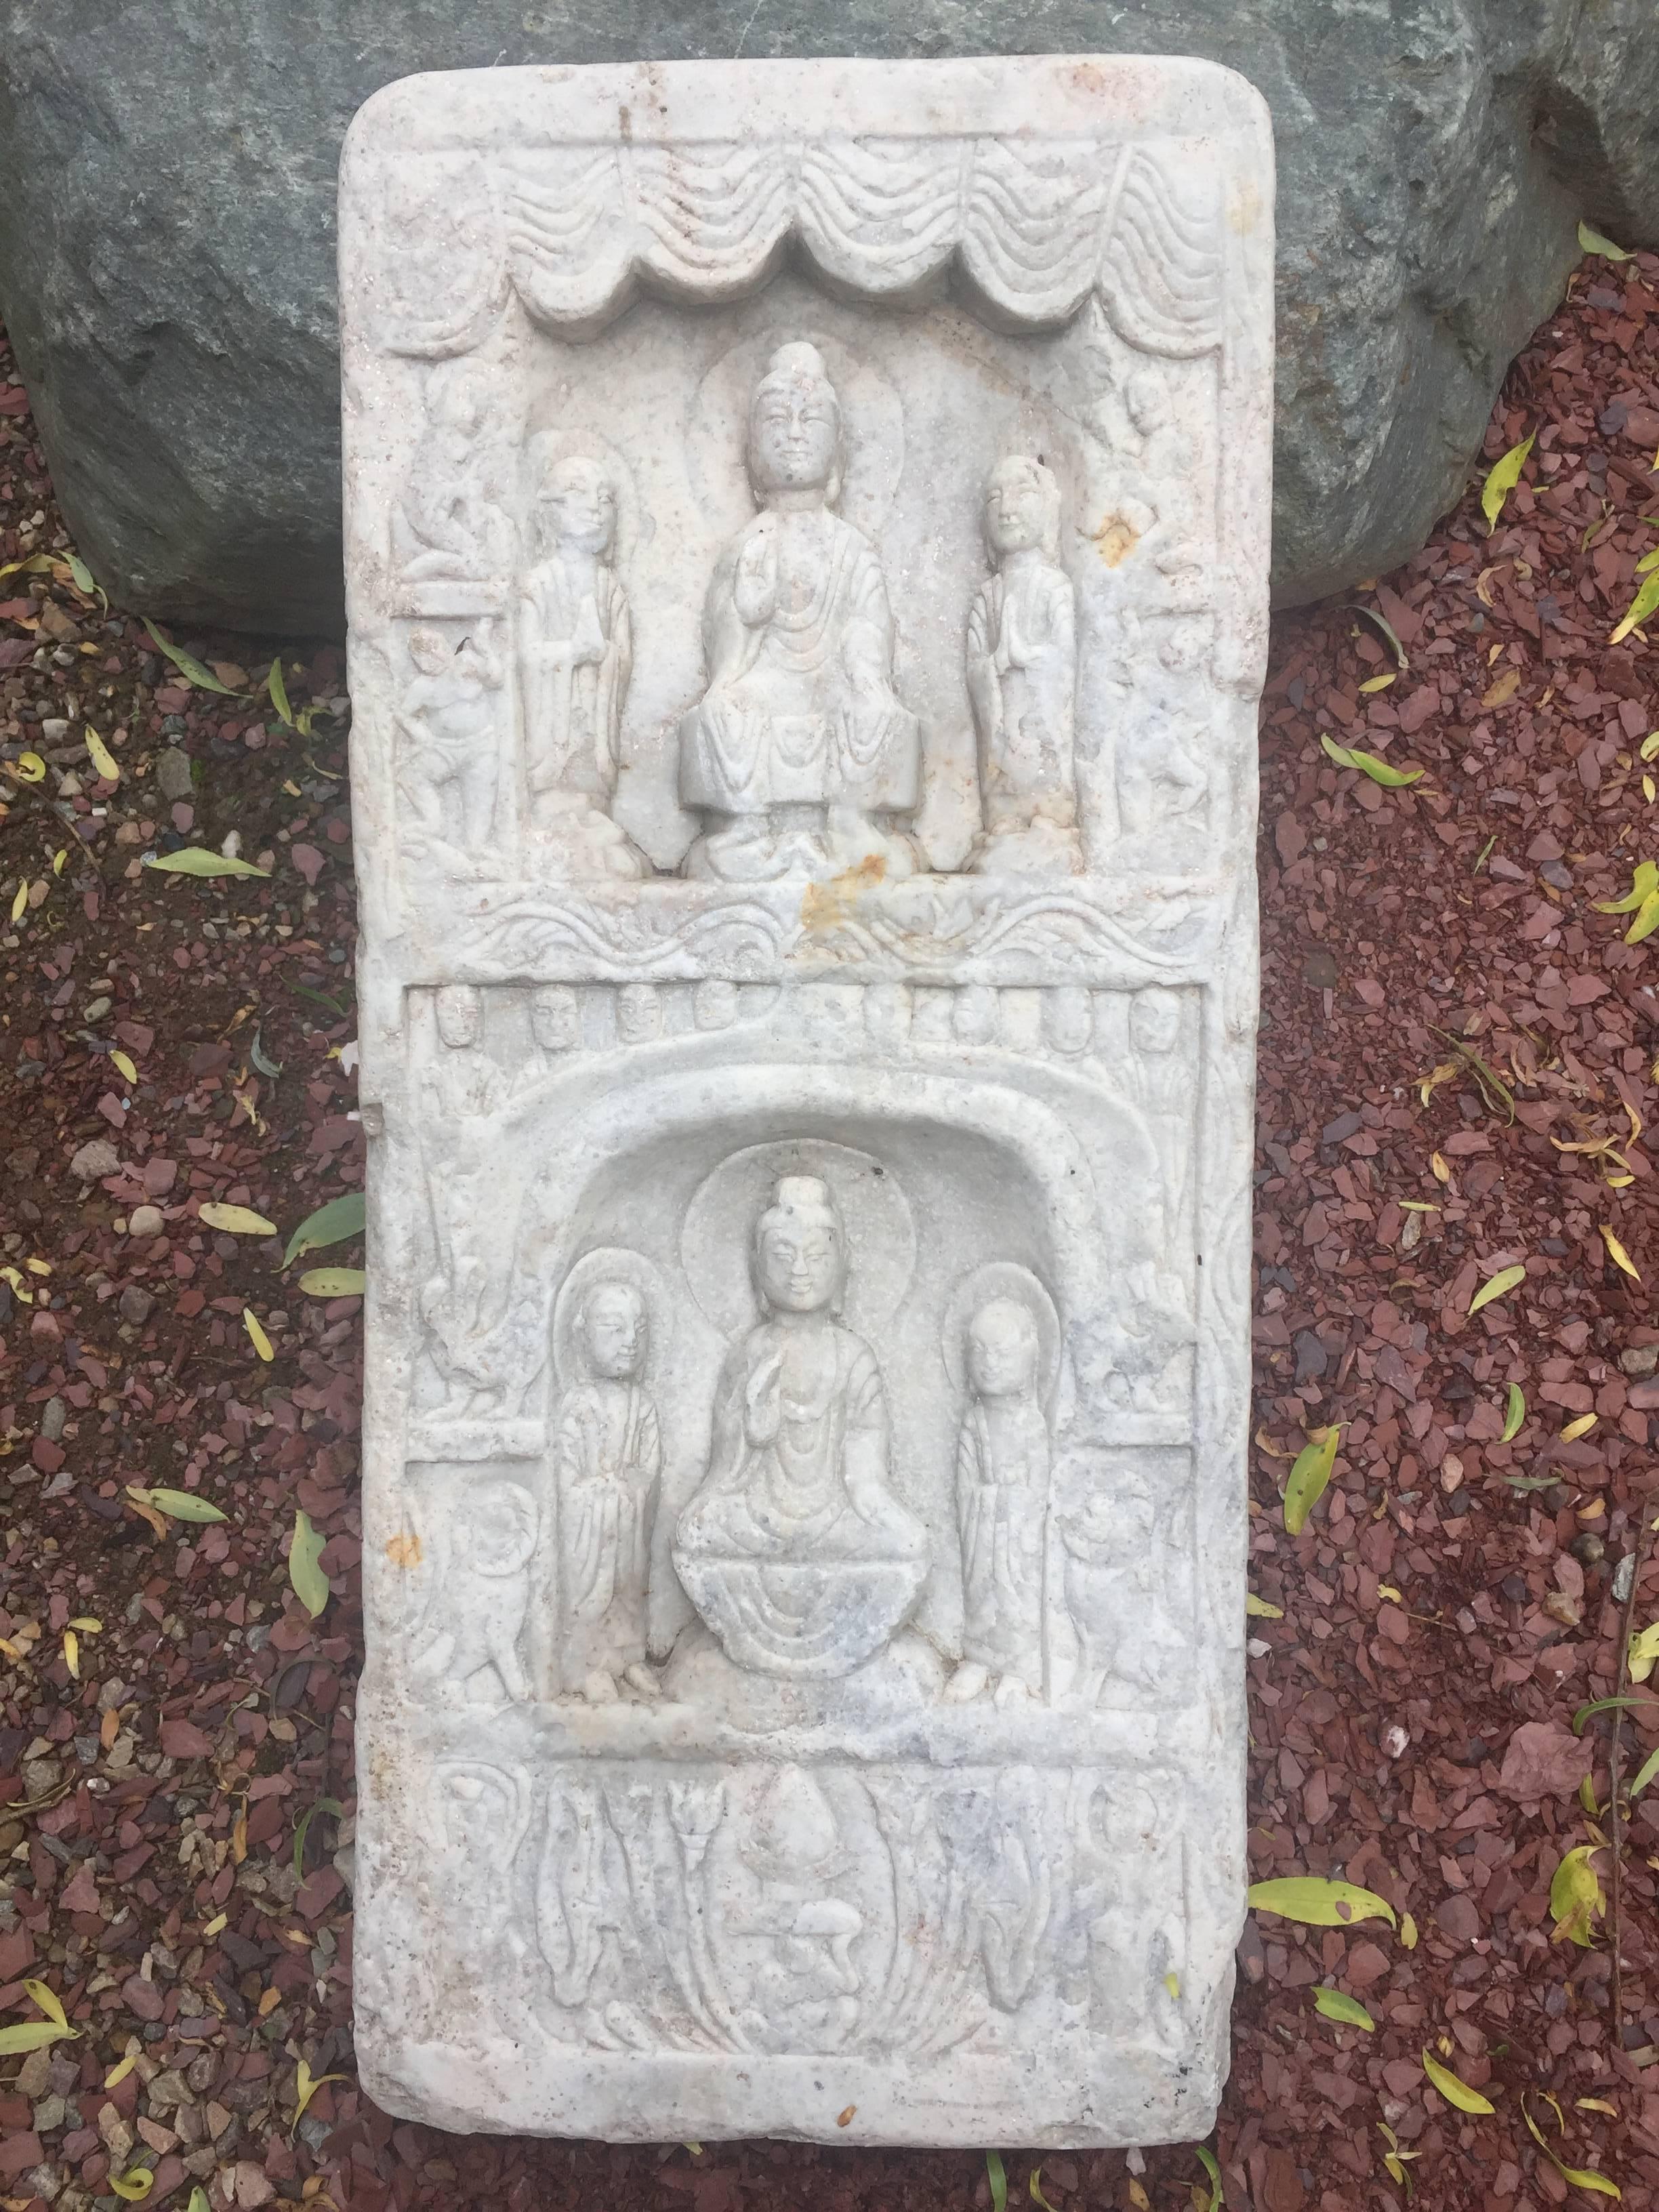 Good garden candidate.

This handsome, older hand-carved marble sculpture of a Double Buddha comes from a fifty year old Chinese antique stone collection formed in the 1970s-1980s. We are offering this last Buddhist work of art from this one of a